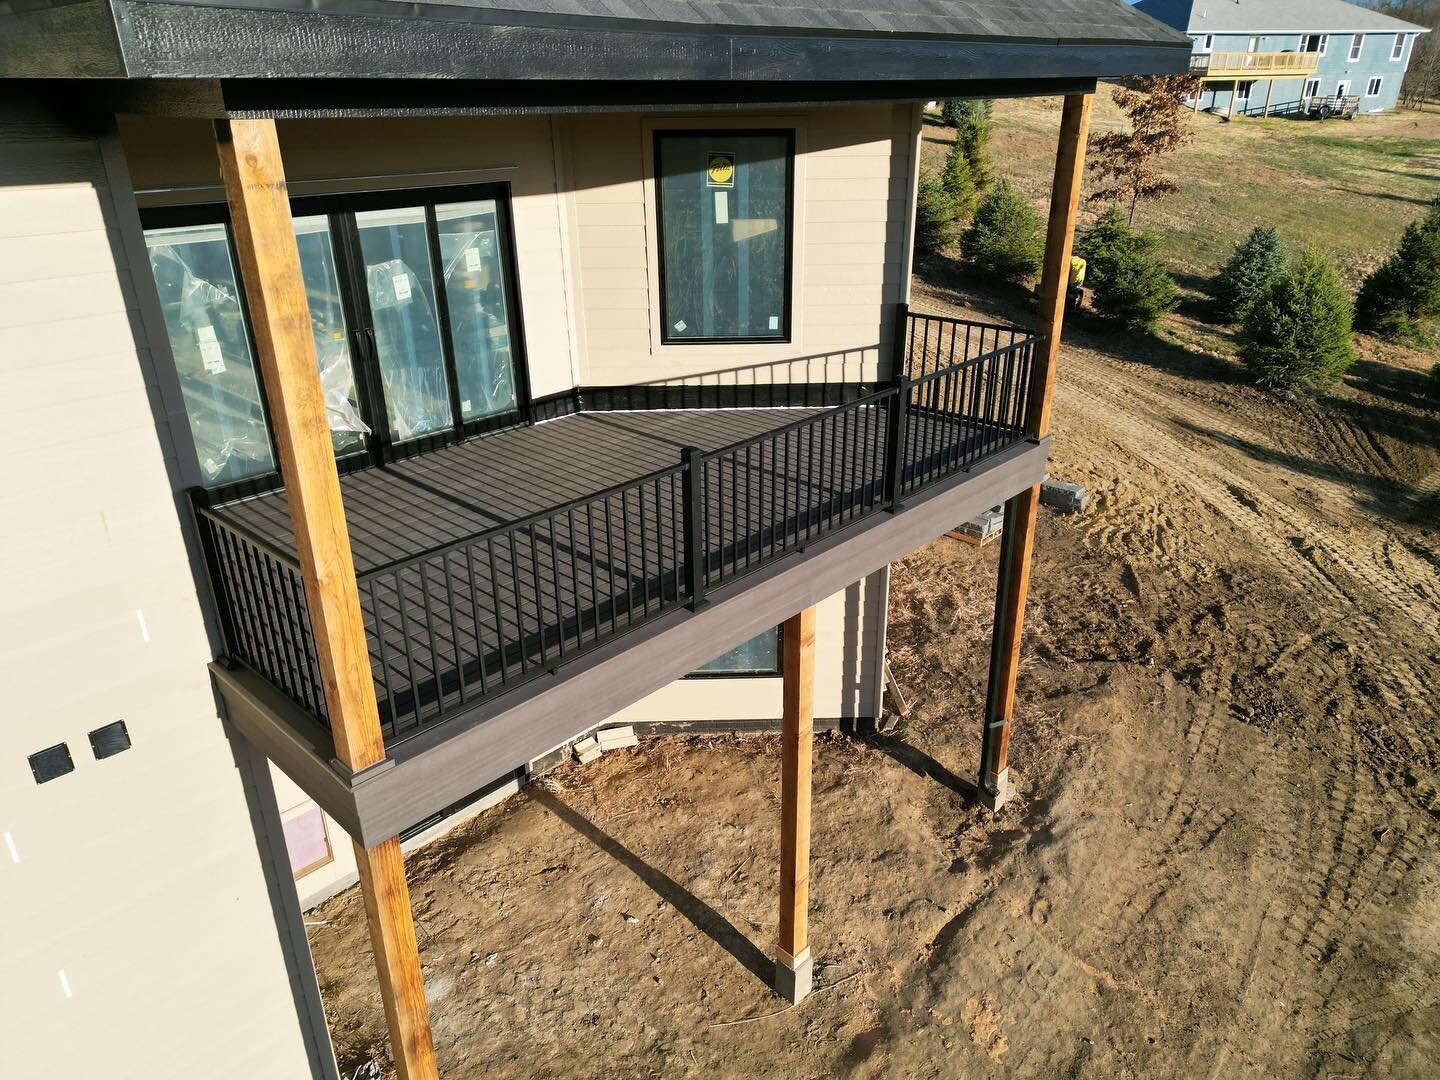 Custom deck for Blum Brothers. The customer wanted a #drainage system and a finished cedar ceiling. #Azek dark hickory decking with #Westbury railings. @azekbuildingproducts @diggerspecialtiesinc @kylergifford @timbertech #customdecks #iowa #huskerde